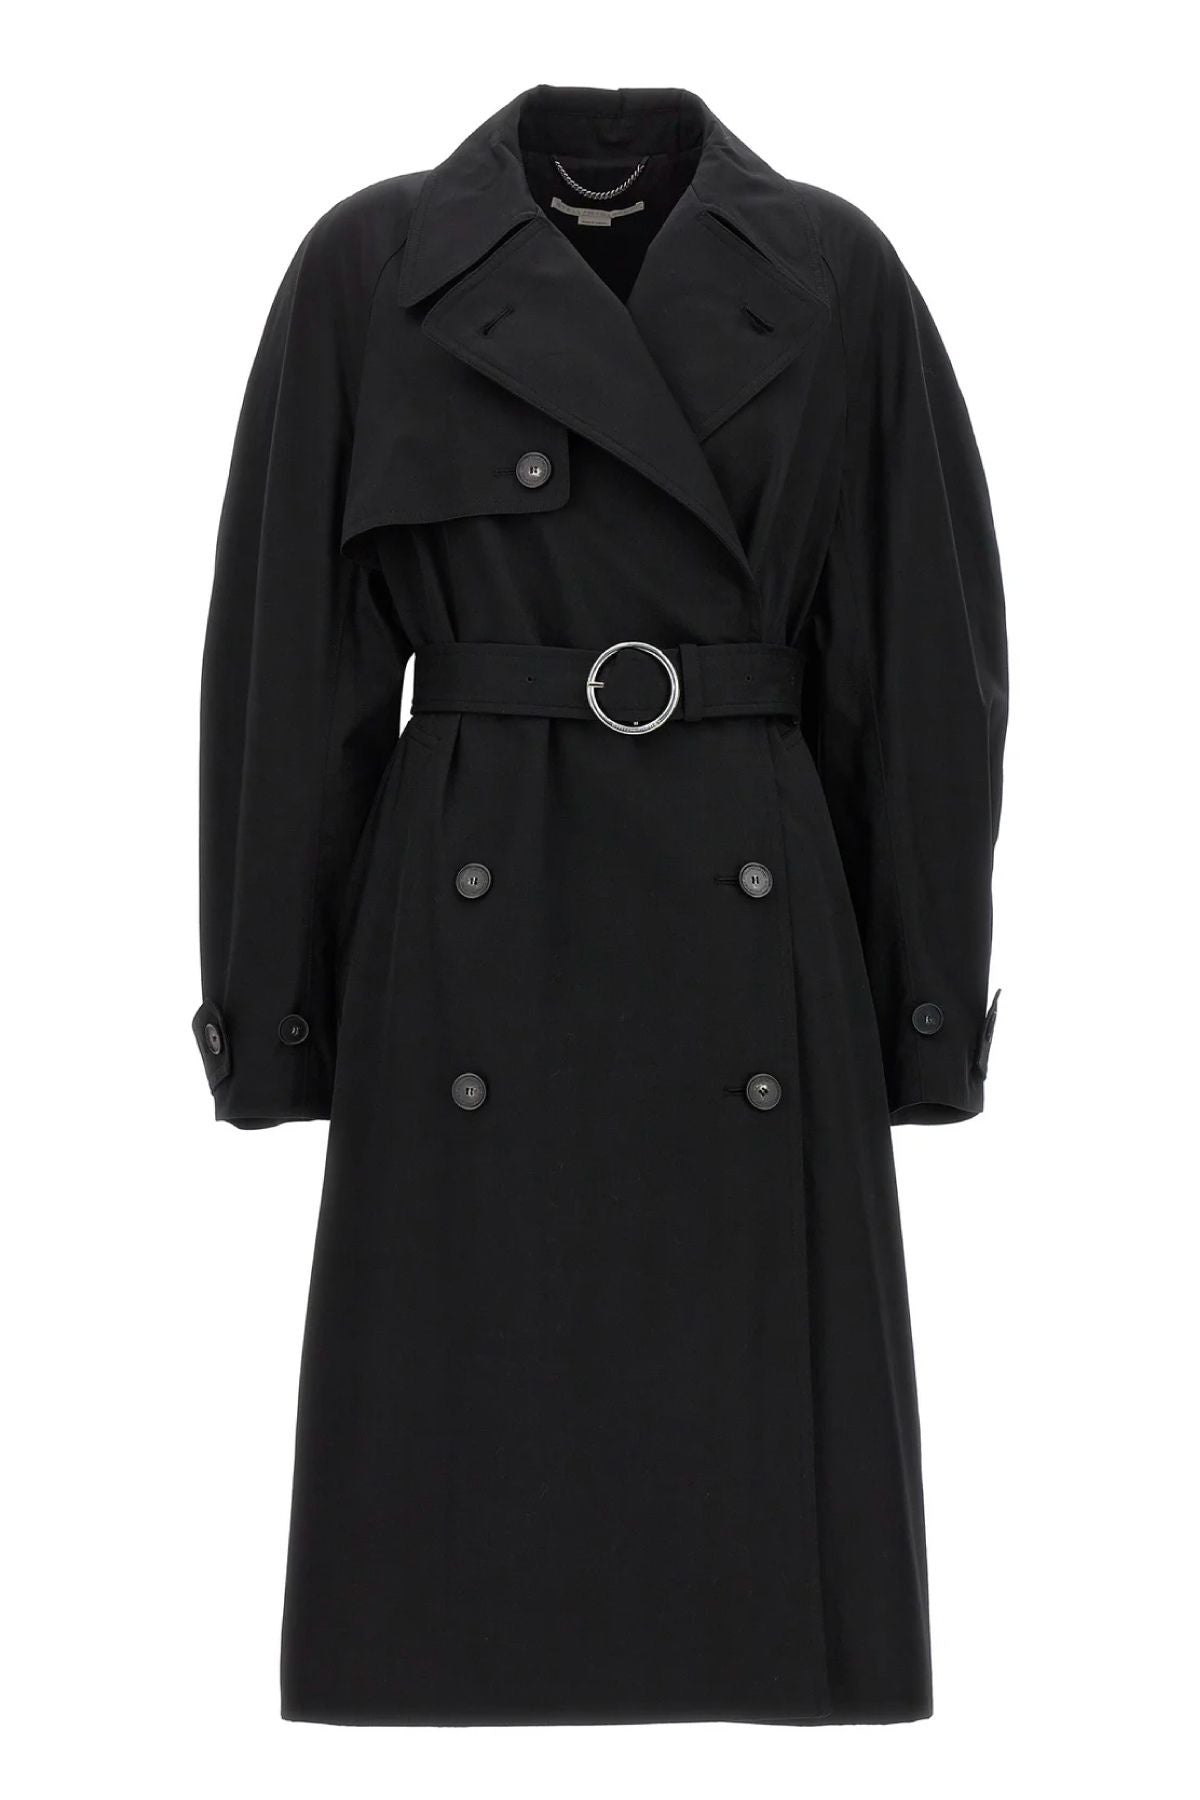 Stella McCartney Double Breasted Iconic Trench - Black